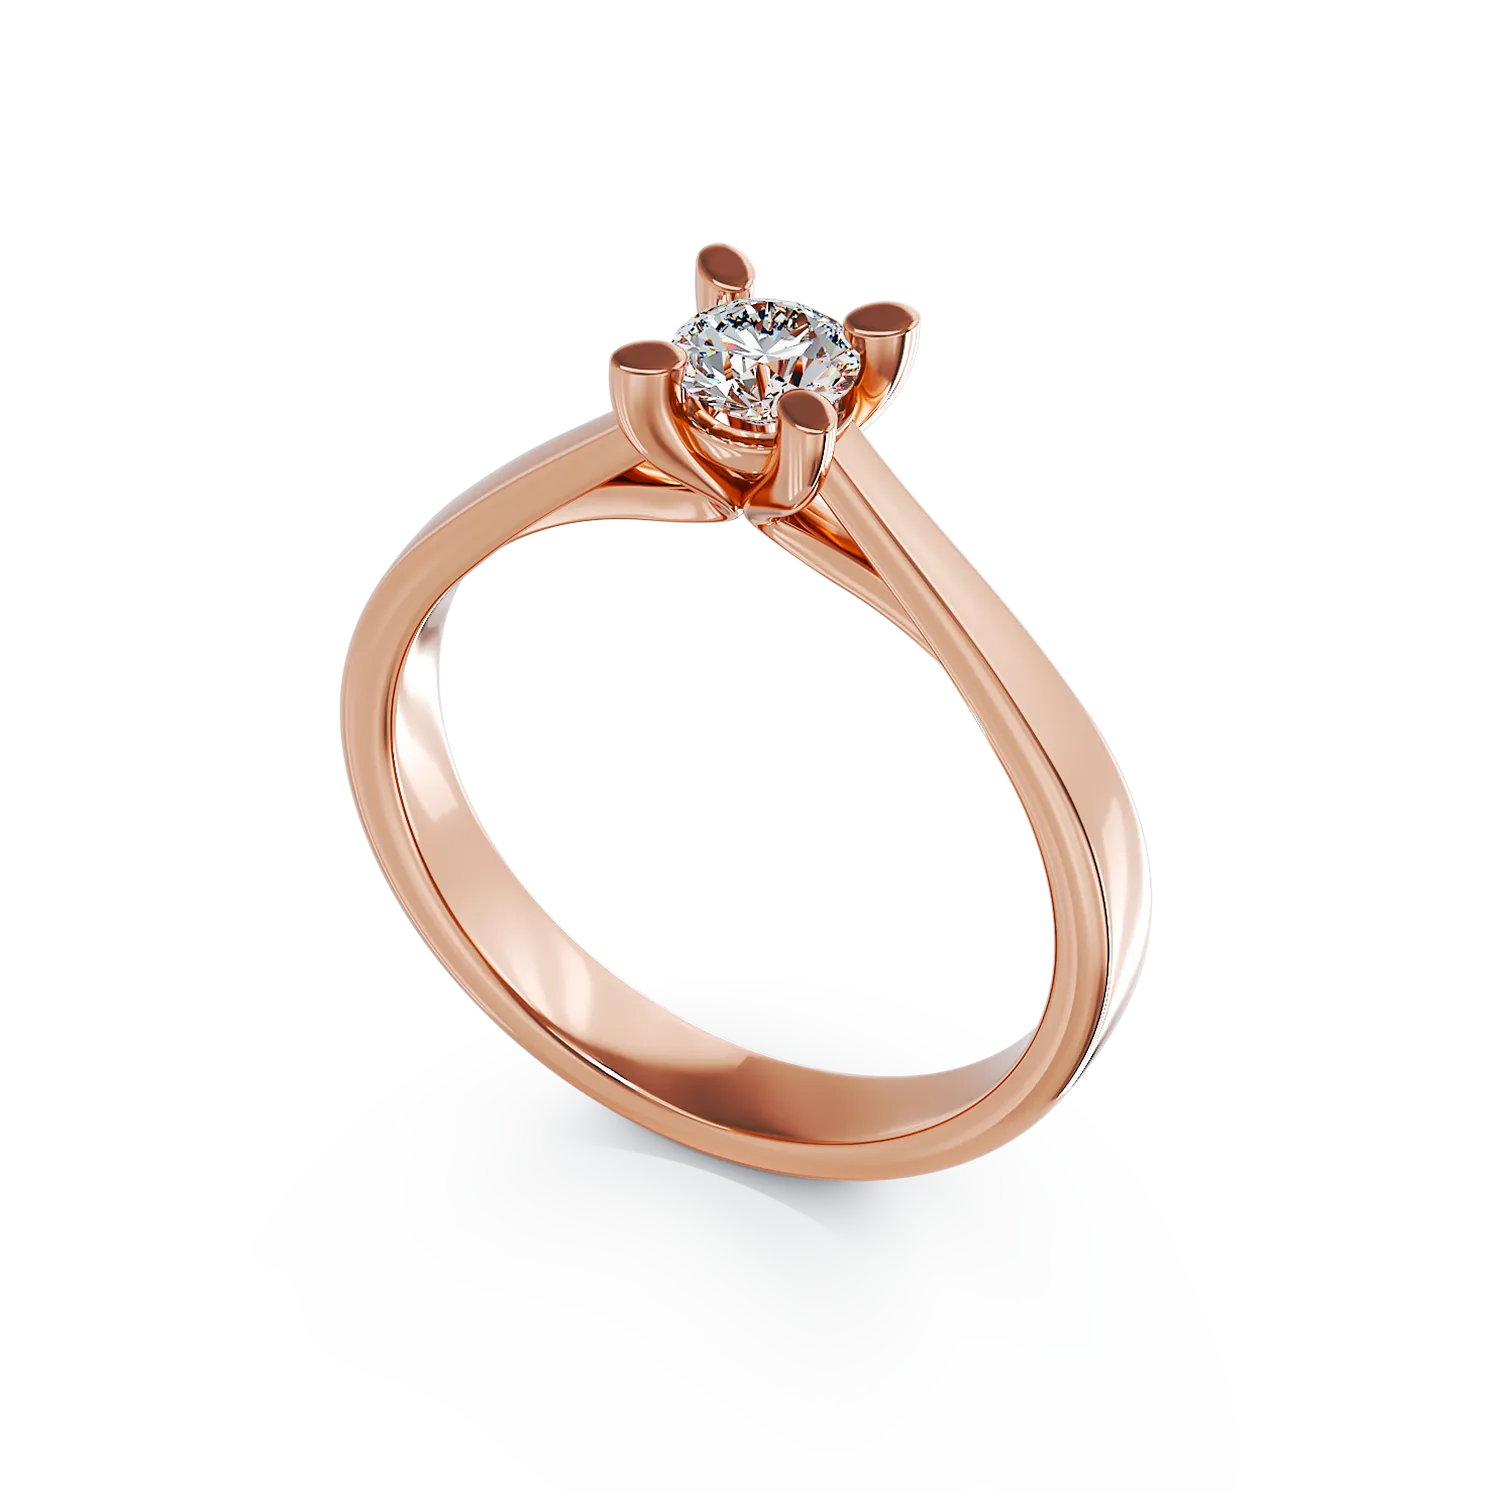 14K rose gold engagement ring with a 0.15ct solitaire diamond